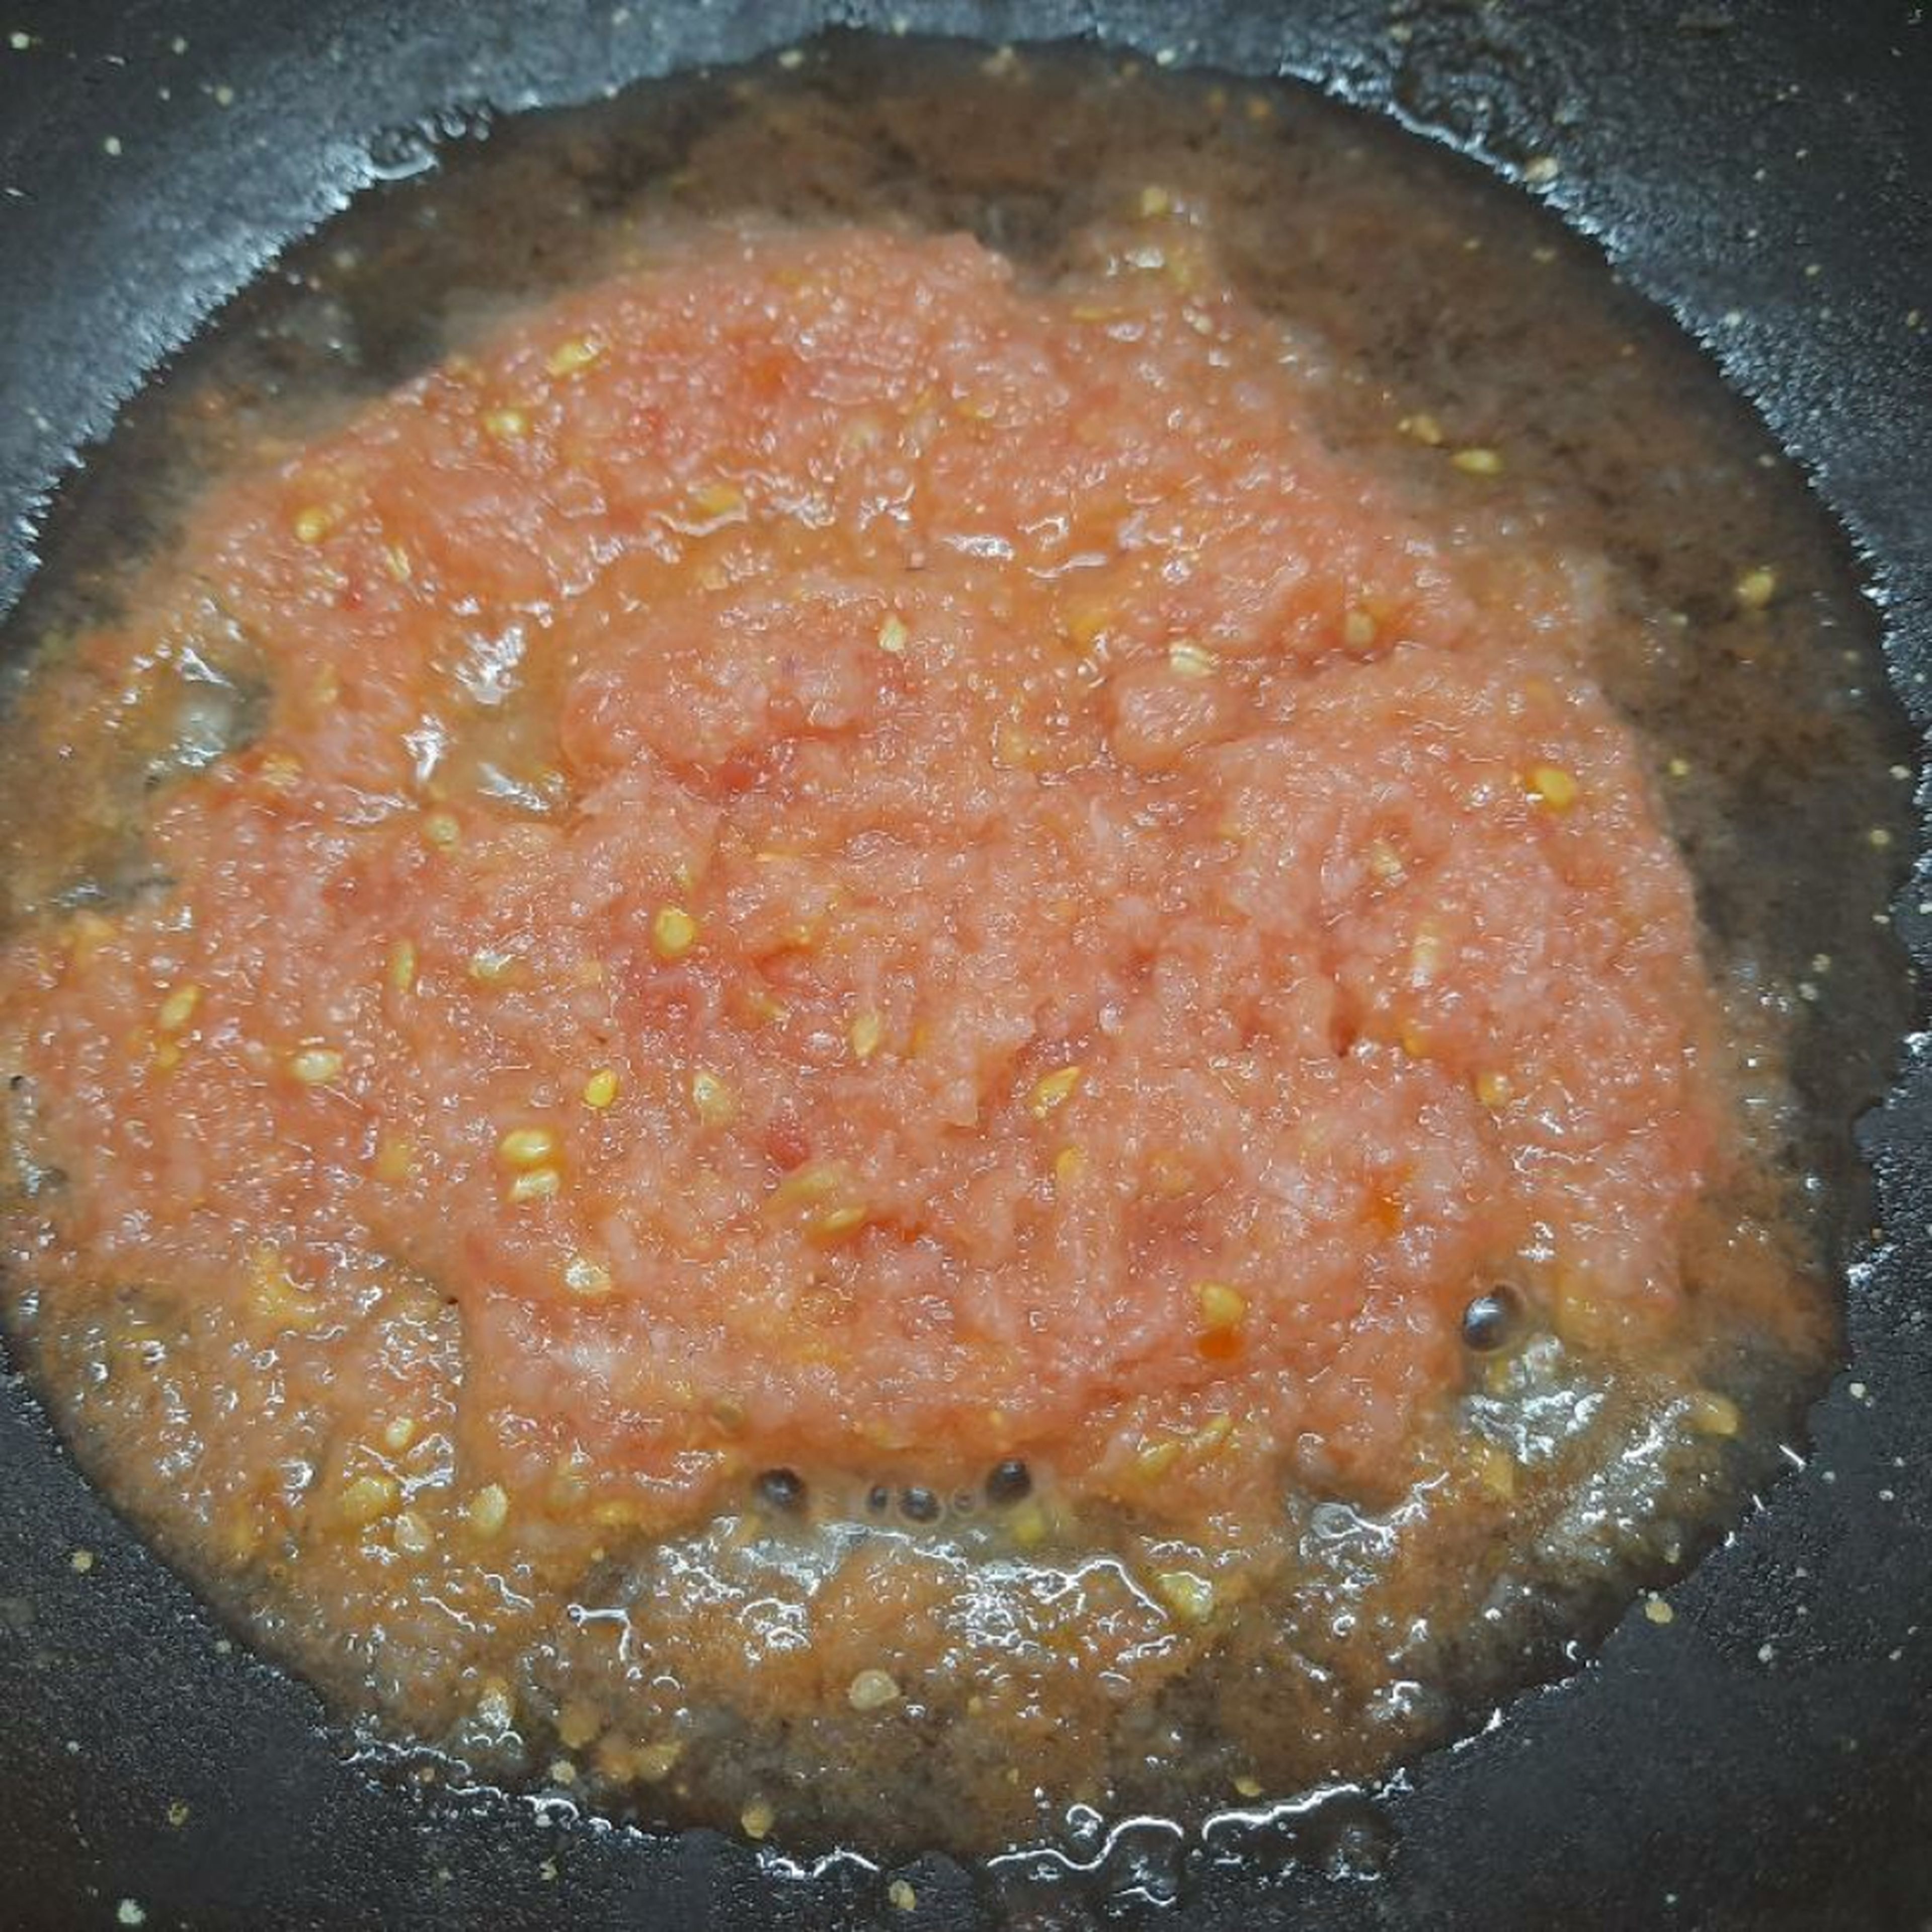 Take a pan. Add 3tsp of oil. Heat on low flame for 2mins. Add onion puree and stir for 2mins. Add tomato puree. Mix well and stir for 2mins. You should see water leaving from sides.